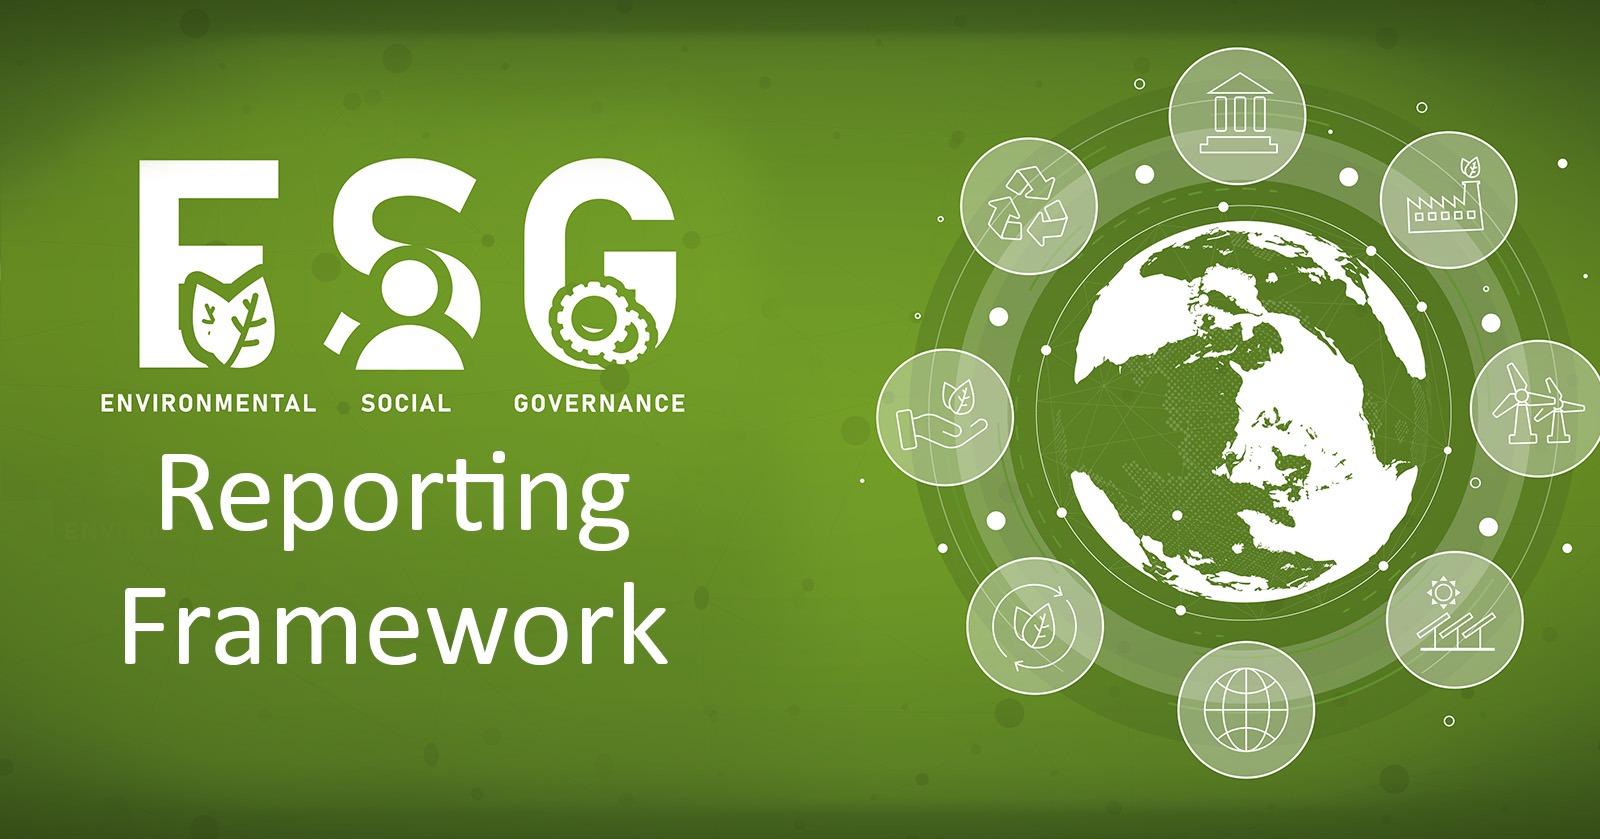 Environmental, Social, and Governance (ESG) Consultancy ServicesServicesEverything ElseWest DelhiOther